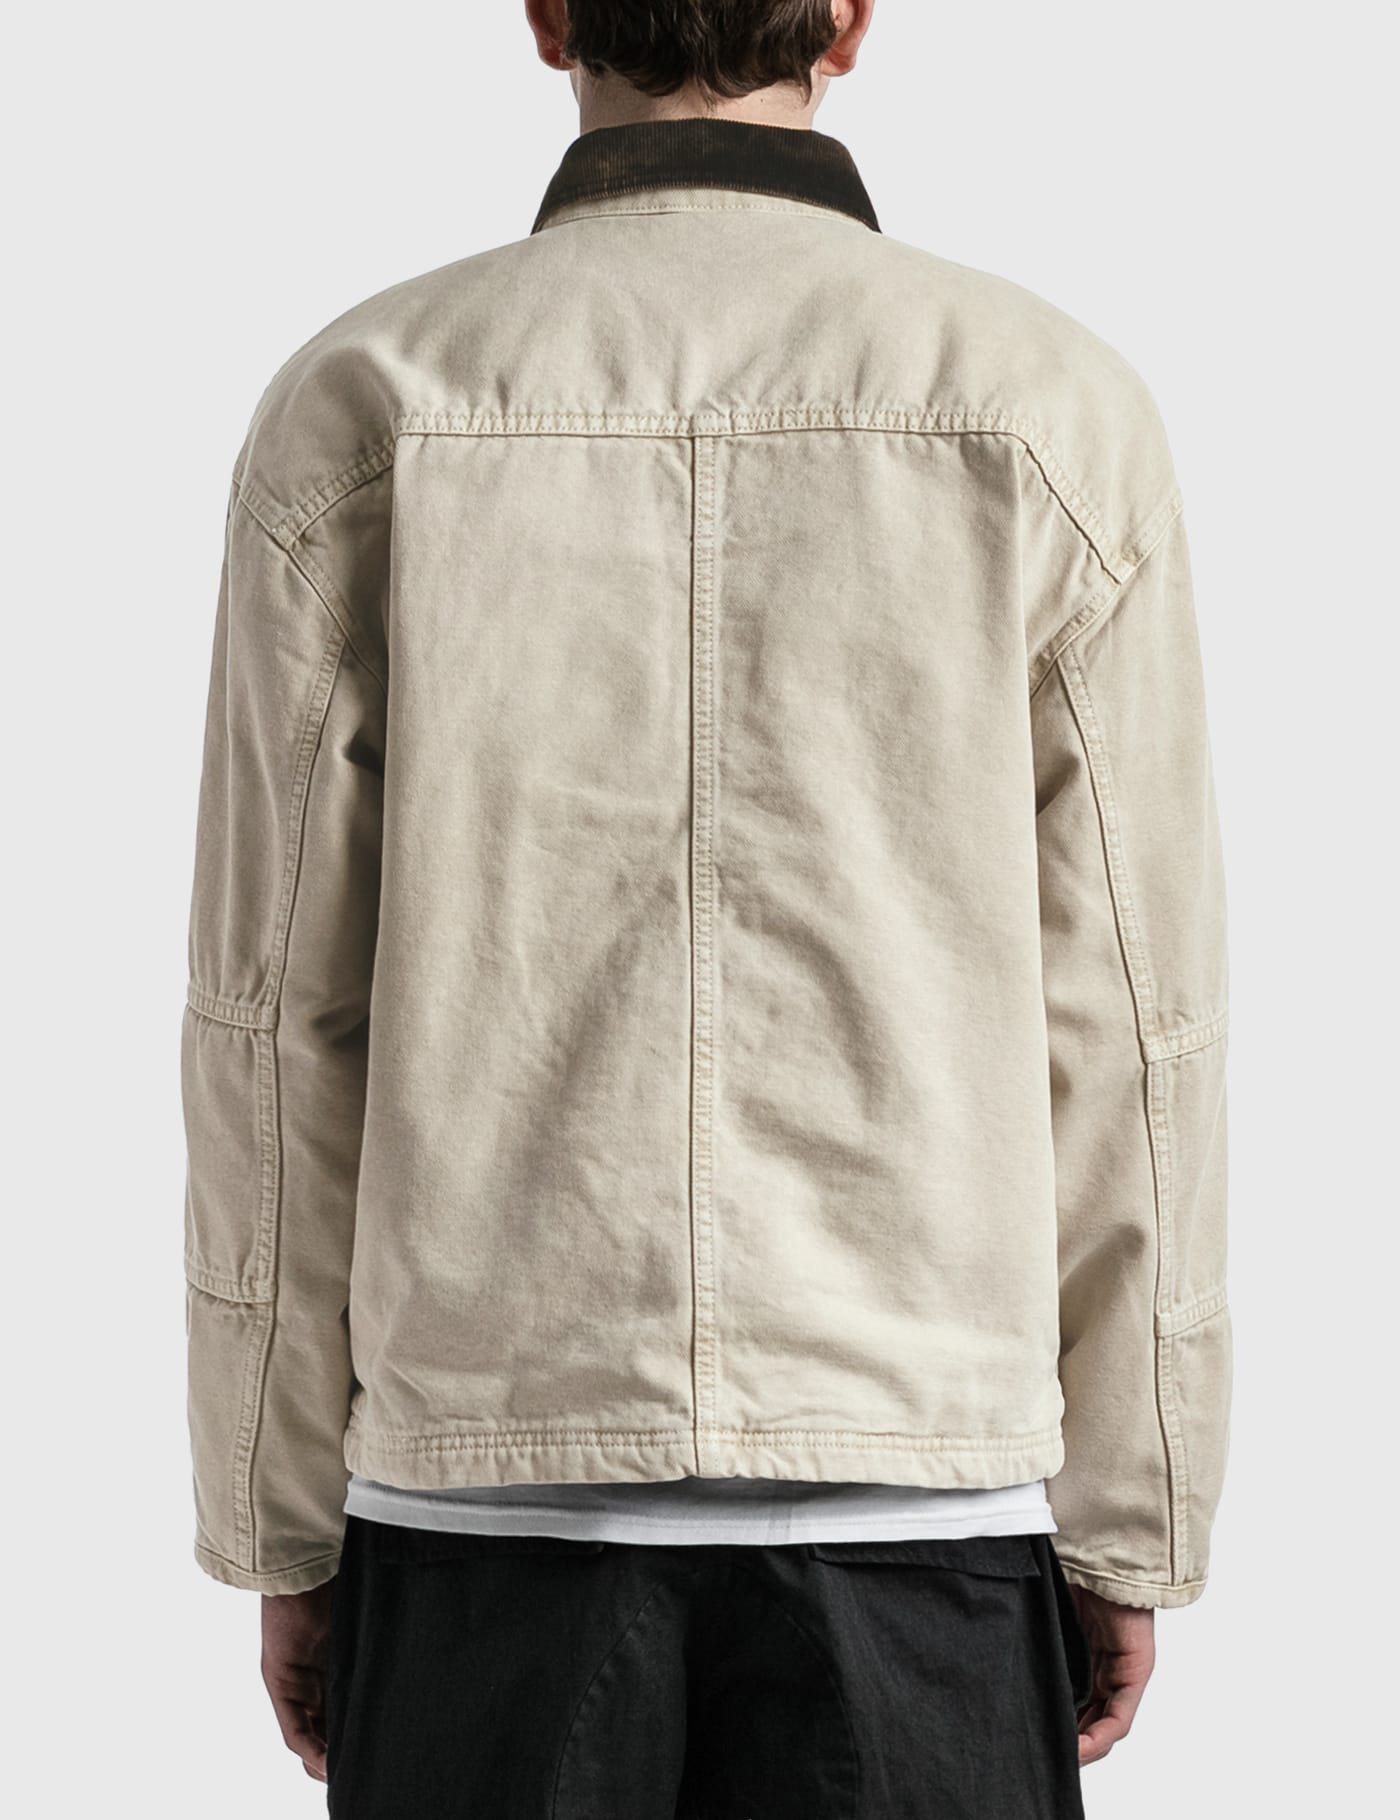 Stüssy - Washed Canvas Shop Jacket | HBX - Globally Curated 